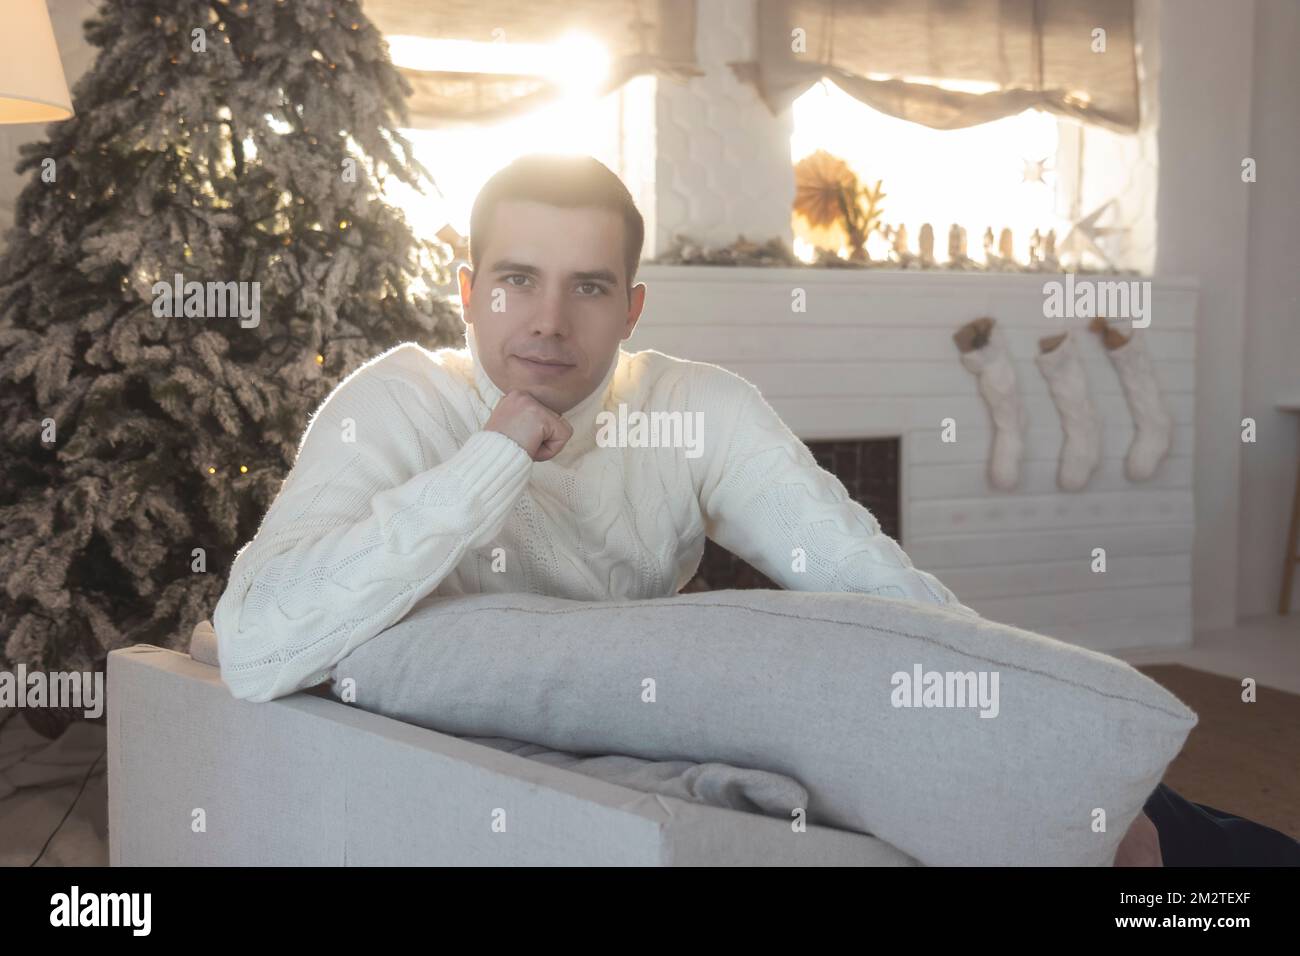 a man in a white sweater against the background of New Year's decorations sits in an armchair Stock Photo